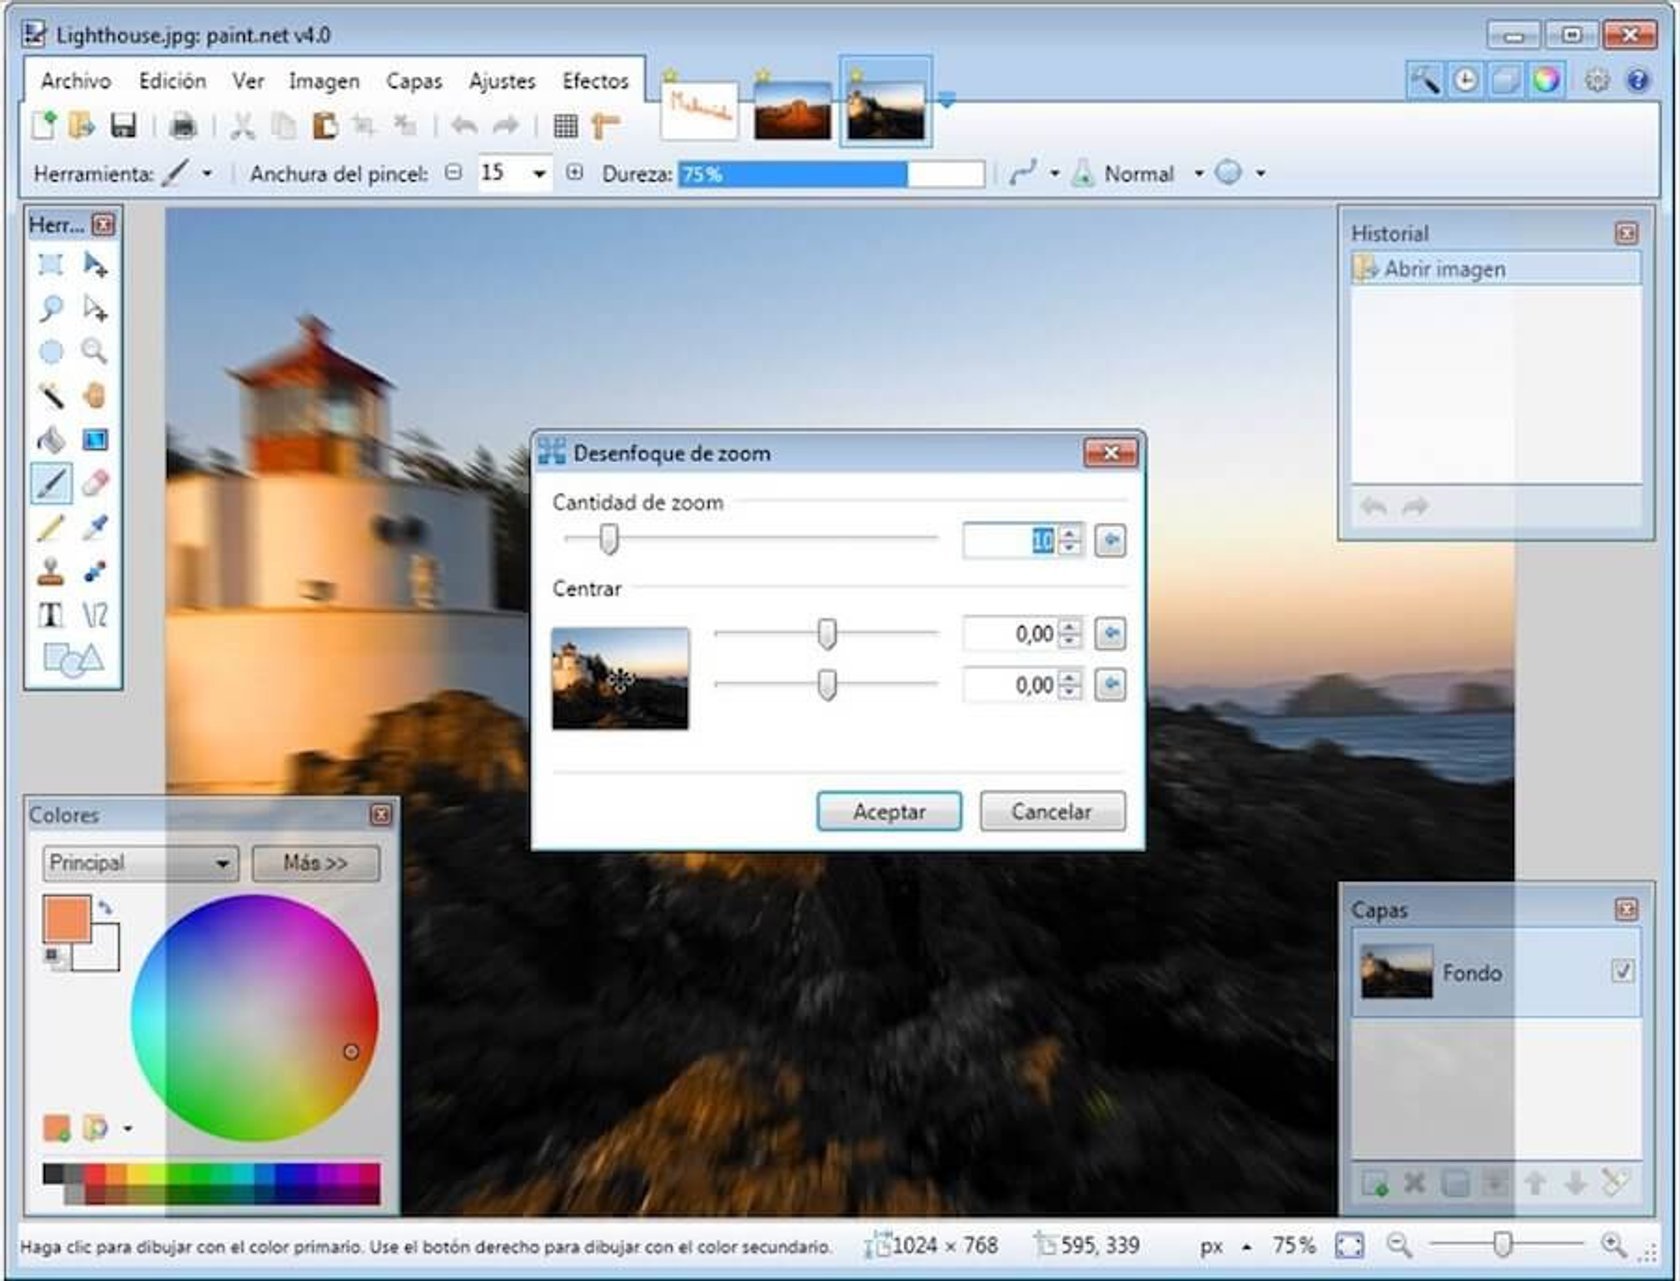 complete control pc editor download